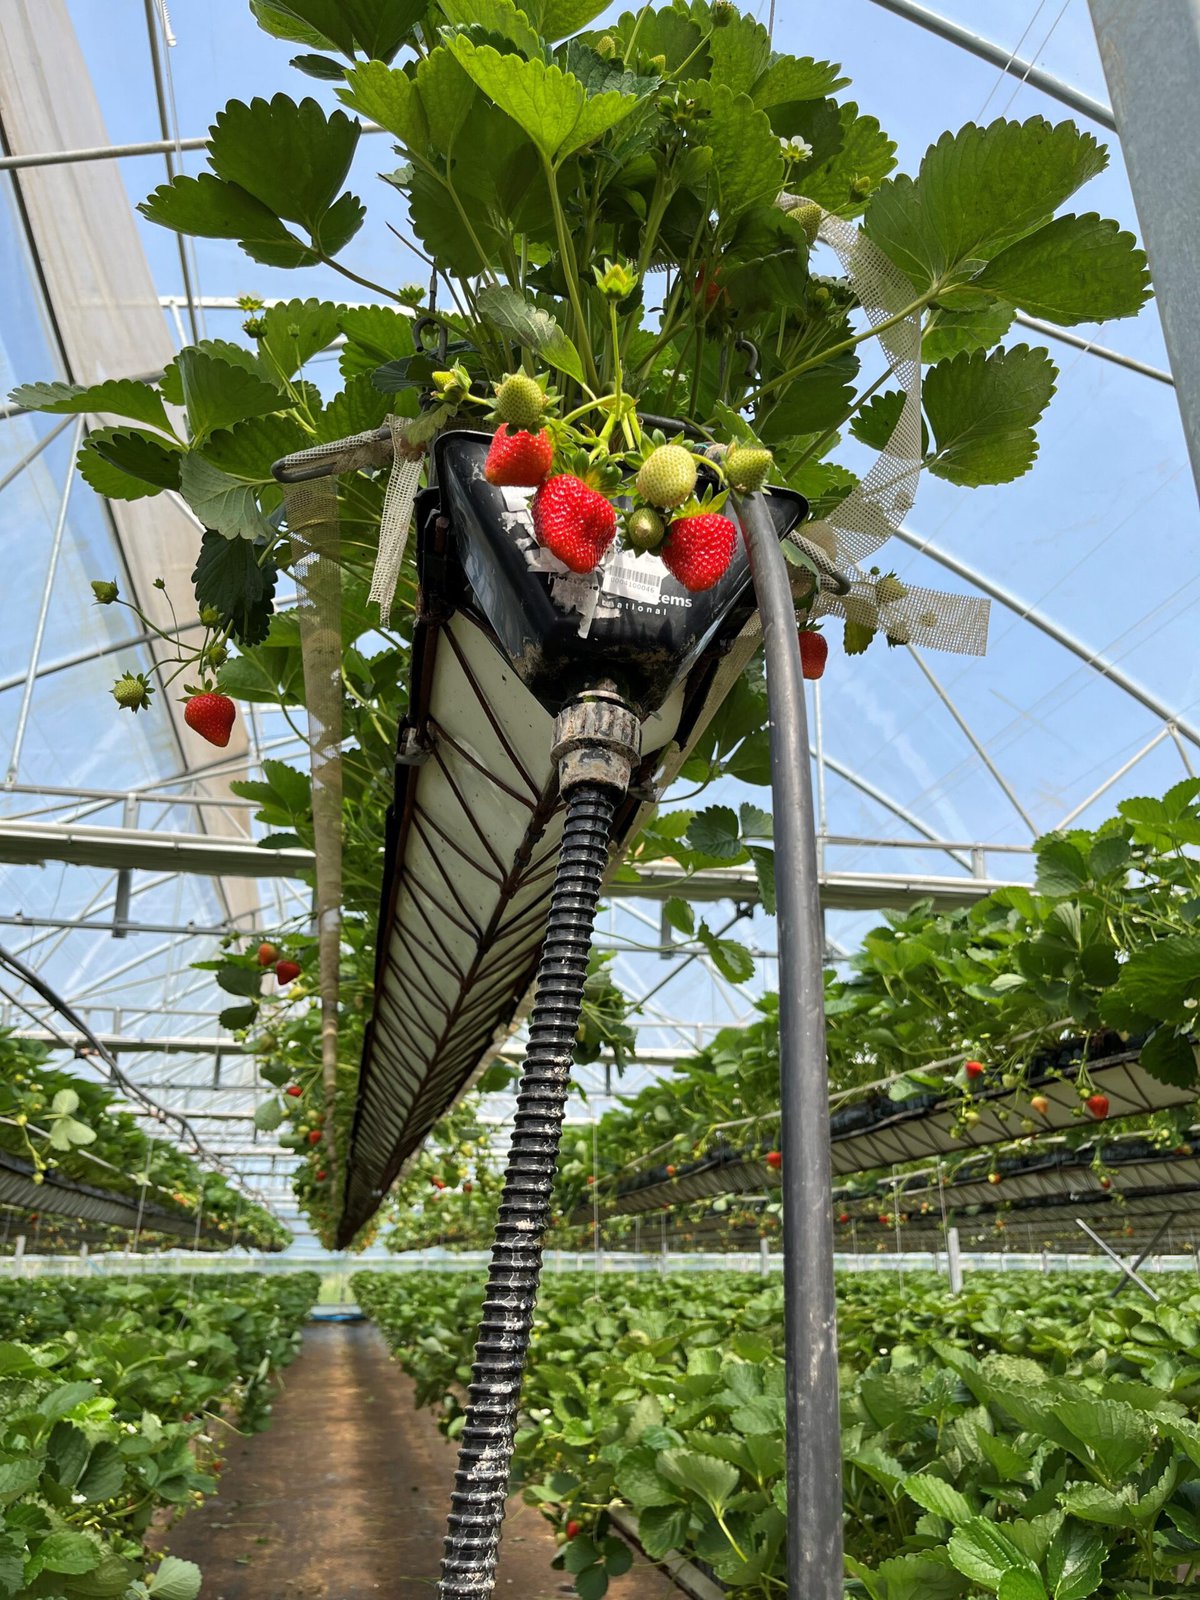 A view of strawberries growing in a greenhouse.